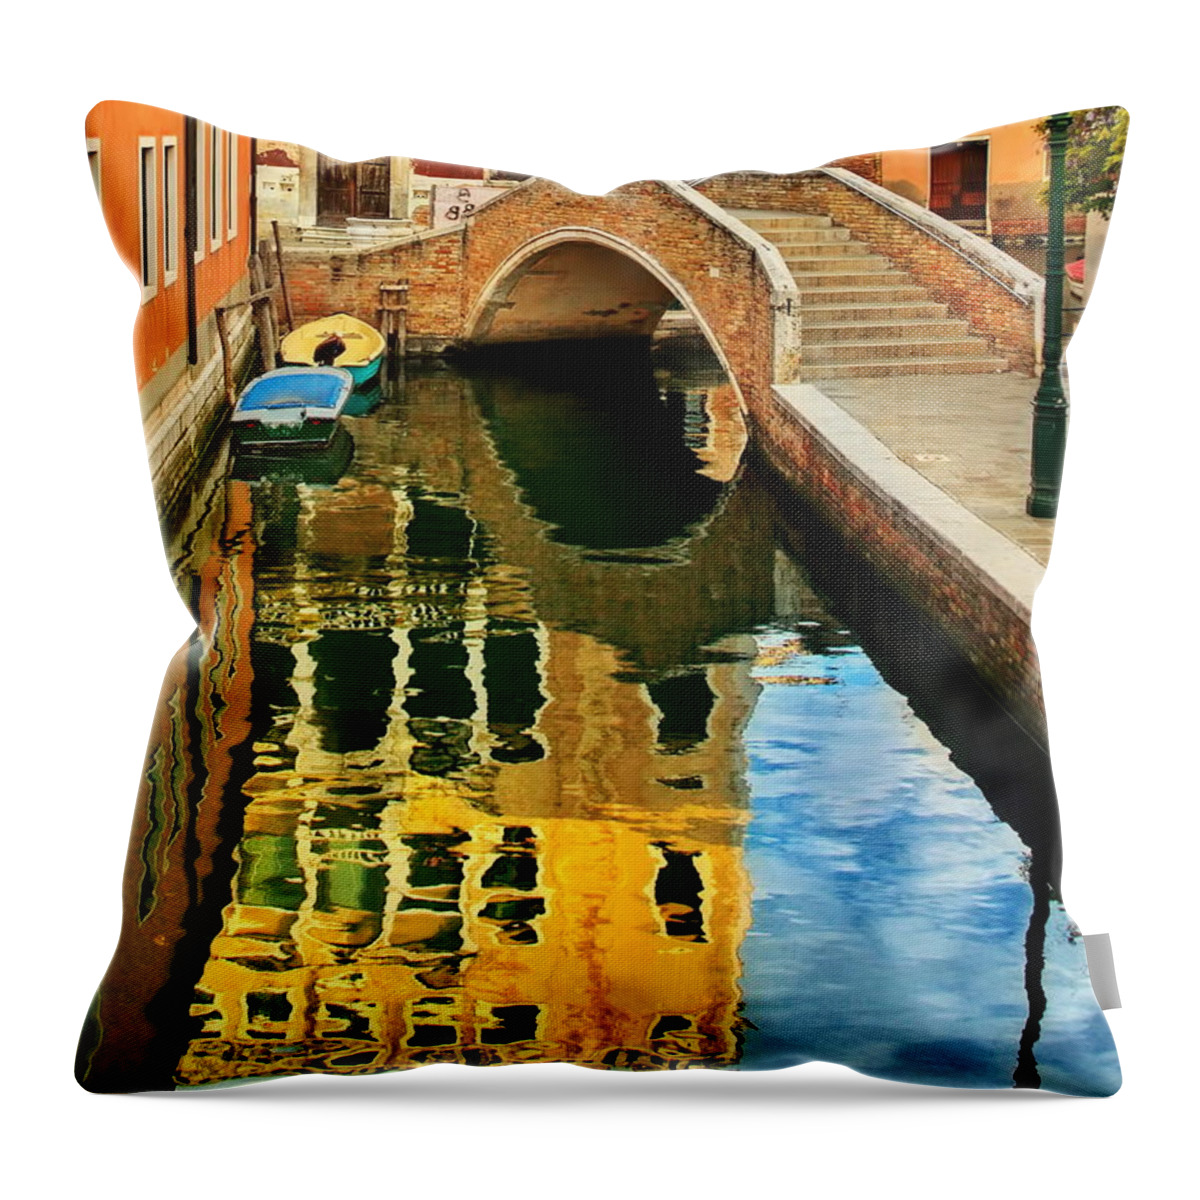 Tranquility Throw Pillow featuring the photograph Venice Reflection by Photo Art By Mandy